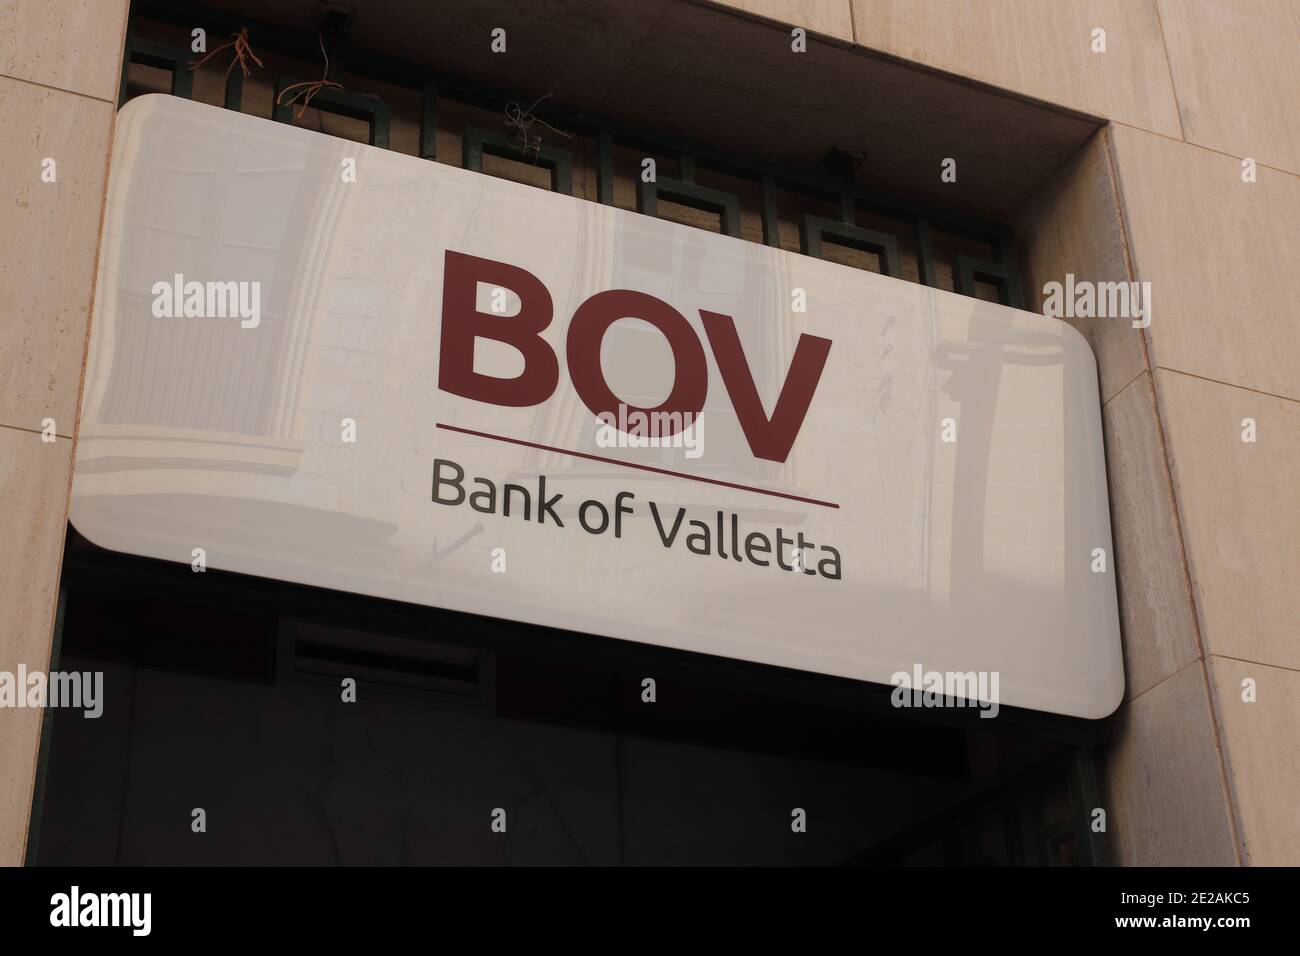 Valletta, Malta - October 20, 2020: Bank of Valletta branch. BOV is a Maltese bank and financial services company, the oldest established financial se Stock Photo